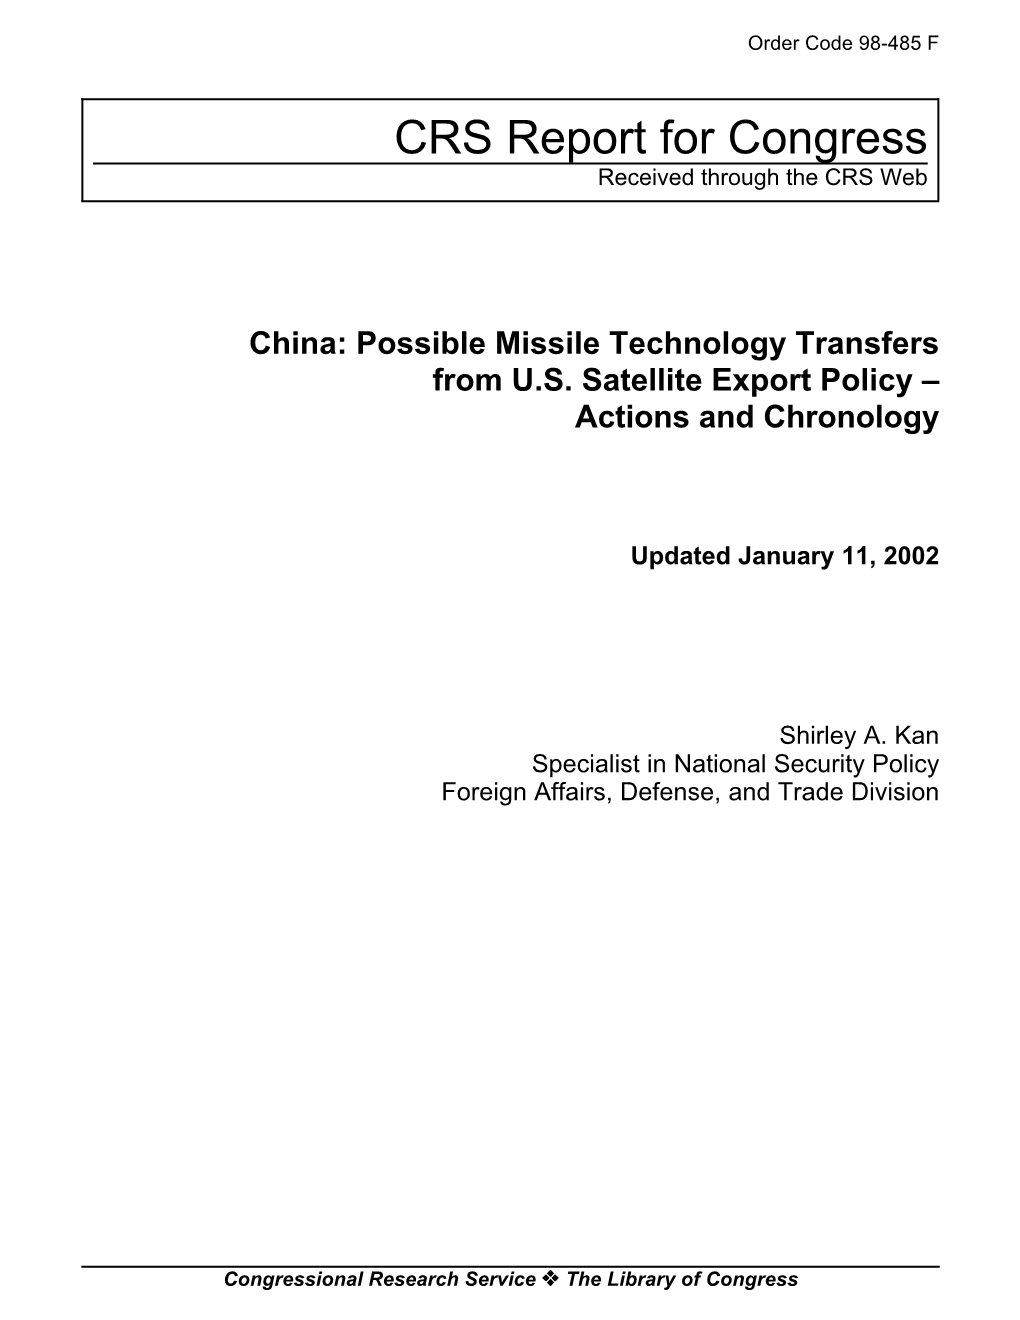 Possible Missile Technology Transfers from US Satellite Export Policy Actions and Chronology